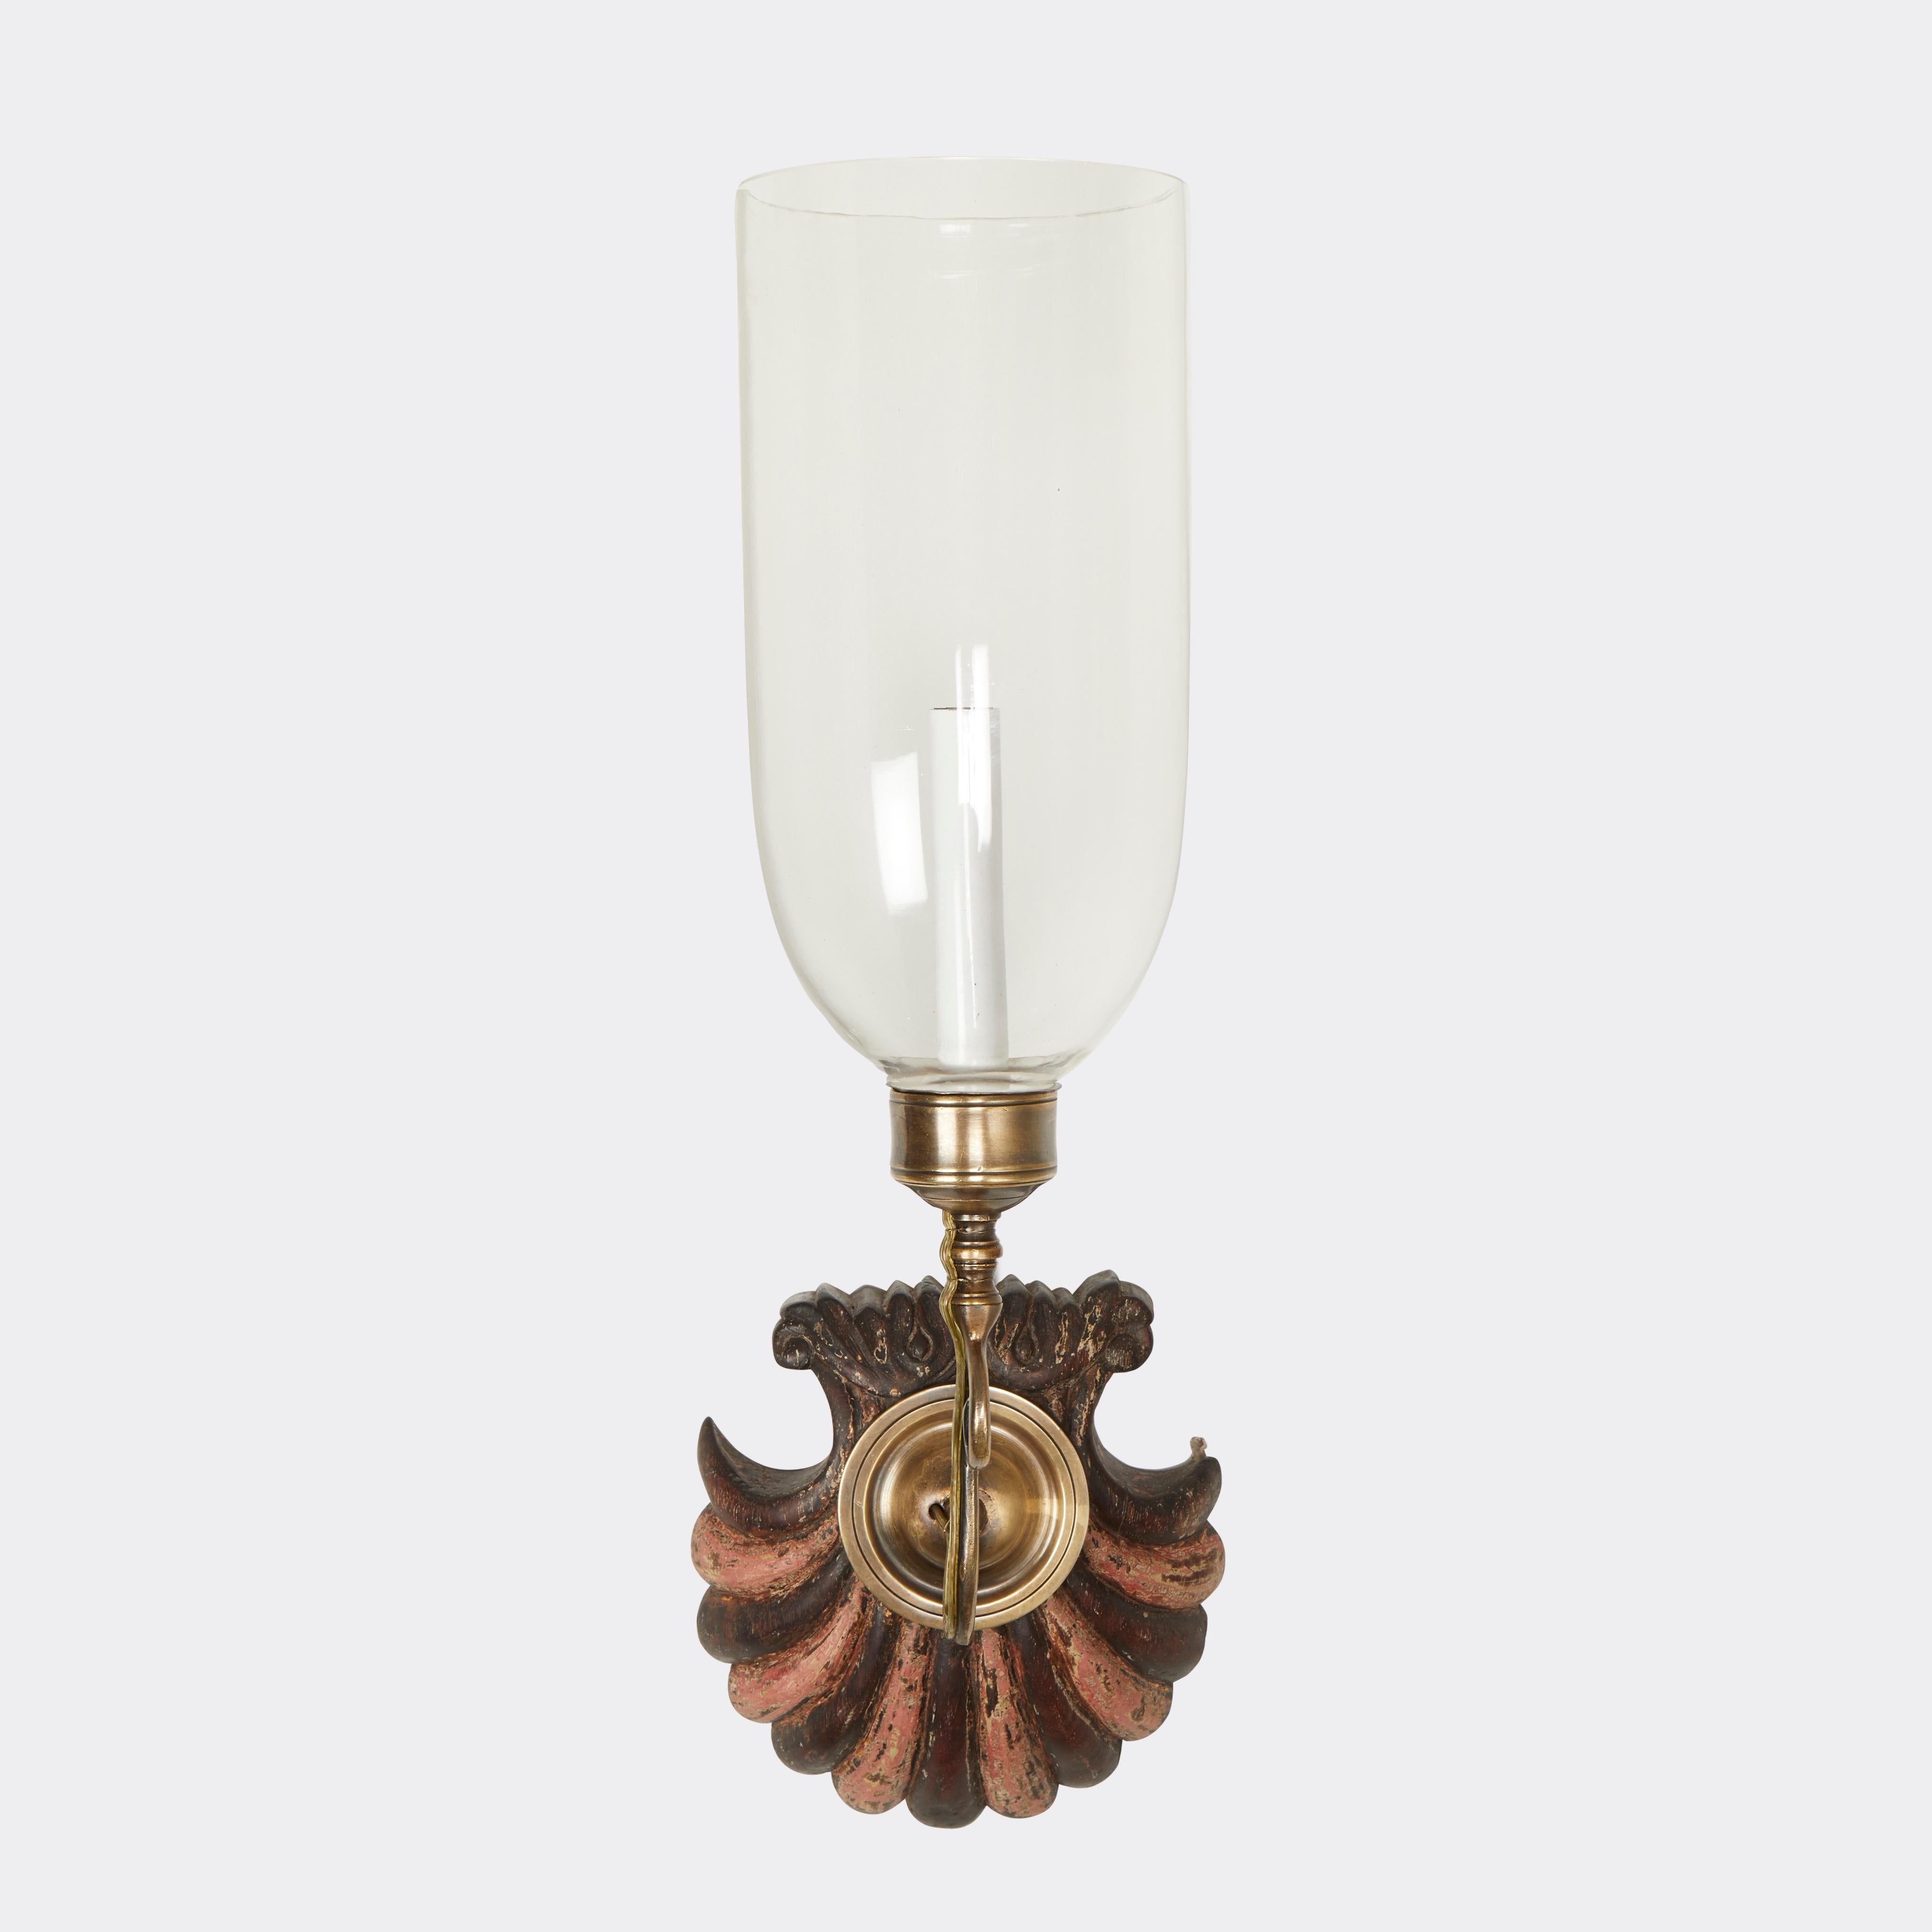 A pair of antique hand-carved scalloped shells from mahogany Anglo Indian backplates with painted decoration with pink stripes alternating with mahogany, patinated brass sconce fittings, and hand-blown clear glass. Electrified with one